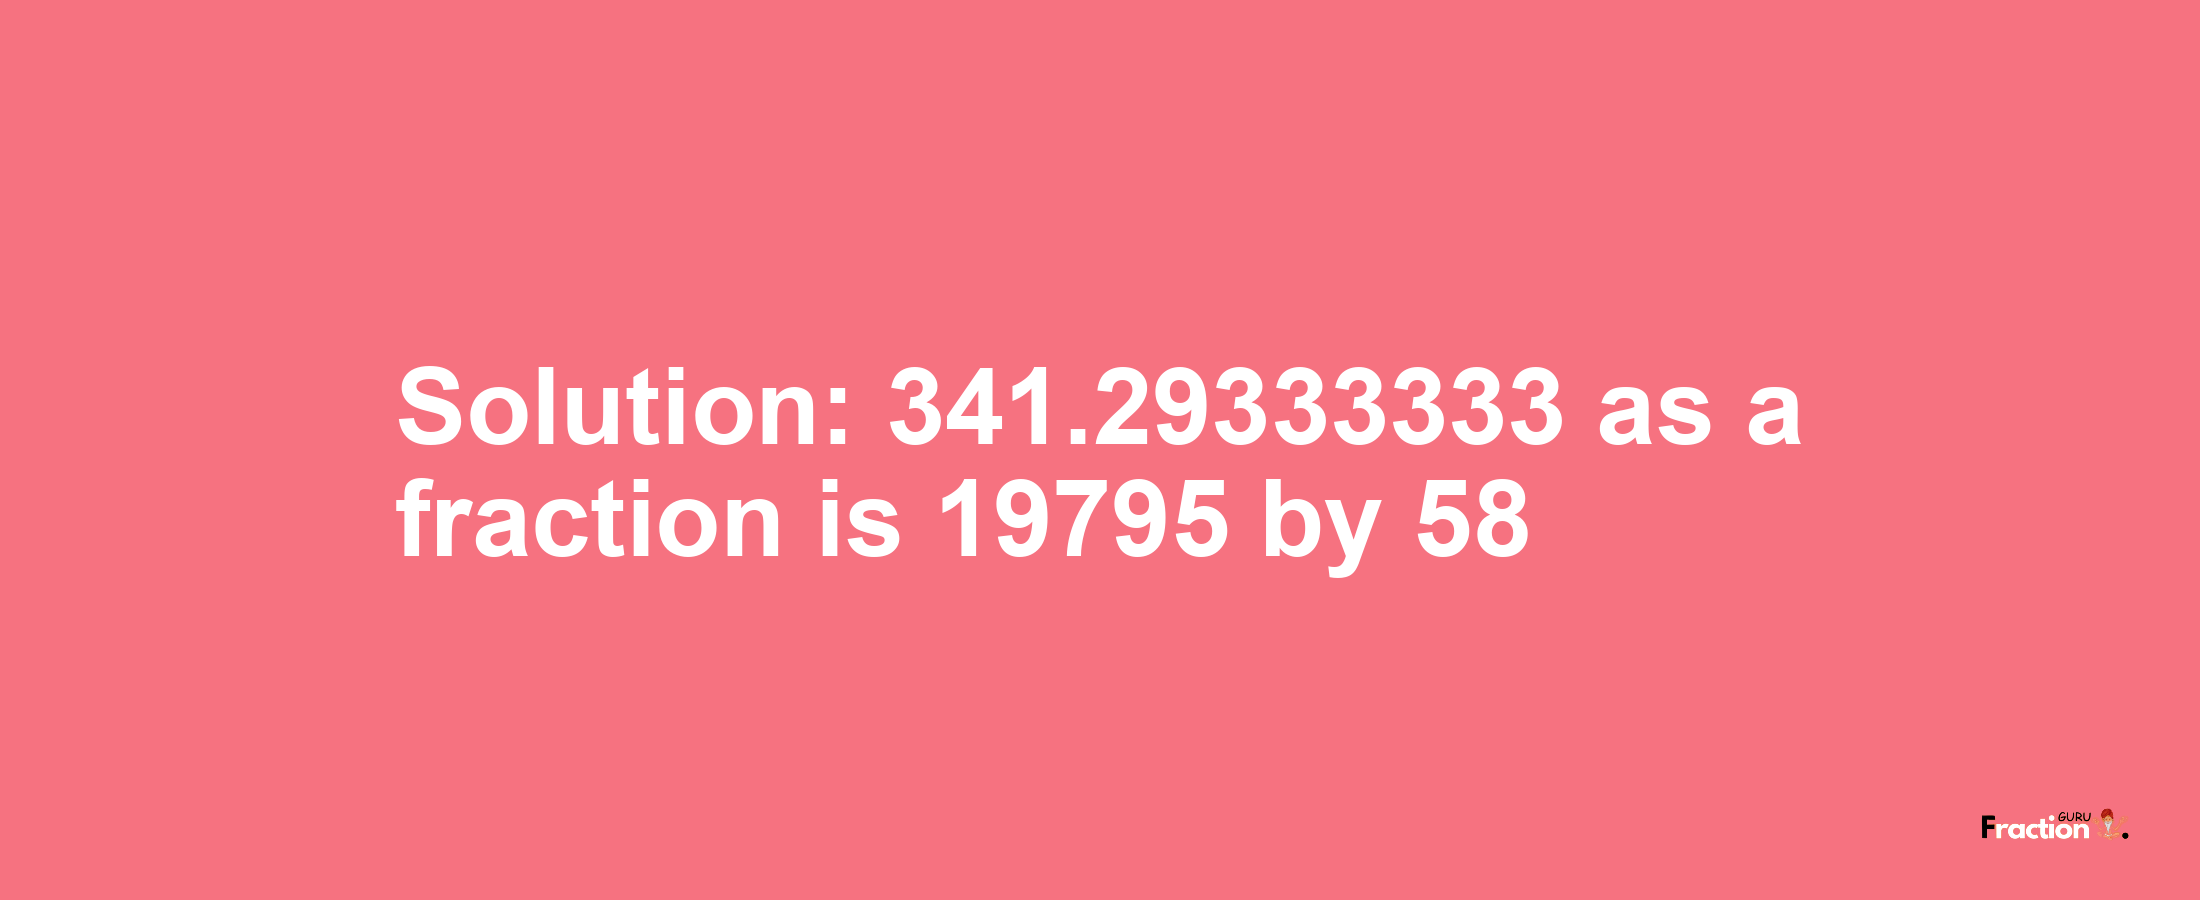 Solution:341.29333333 as a fraction is 19795/58